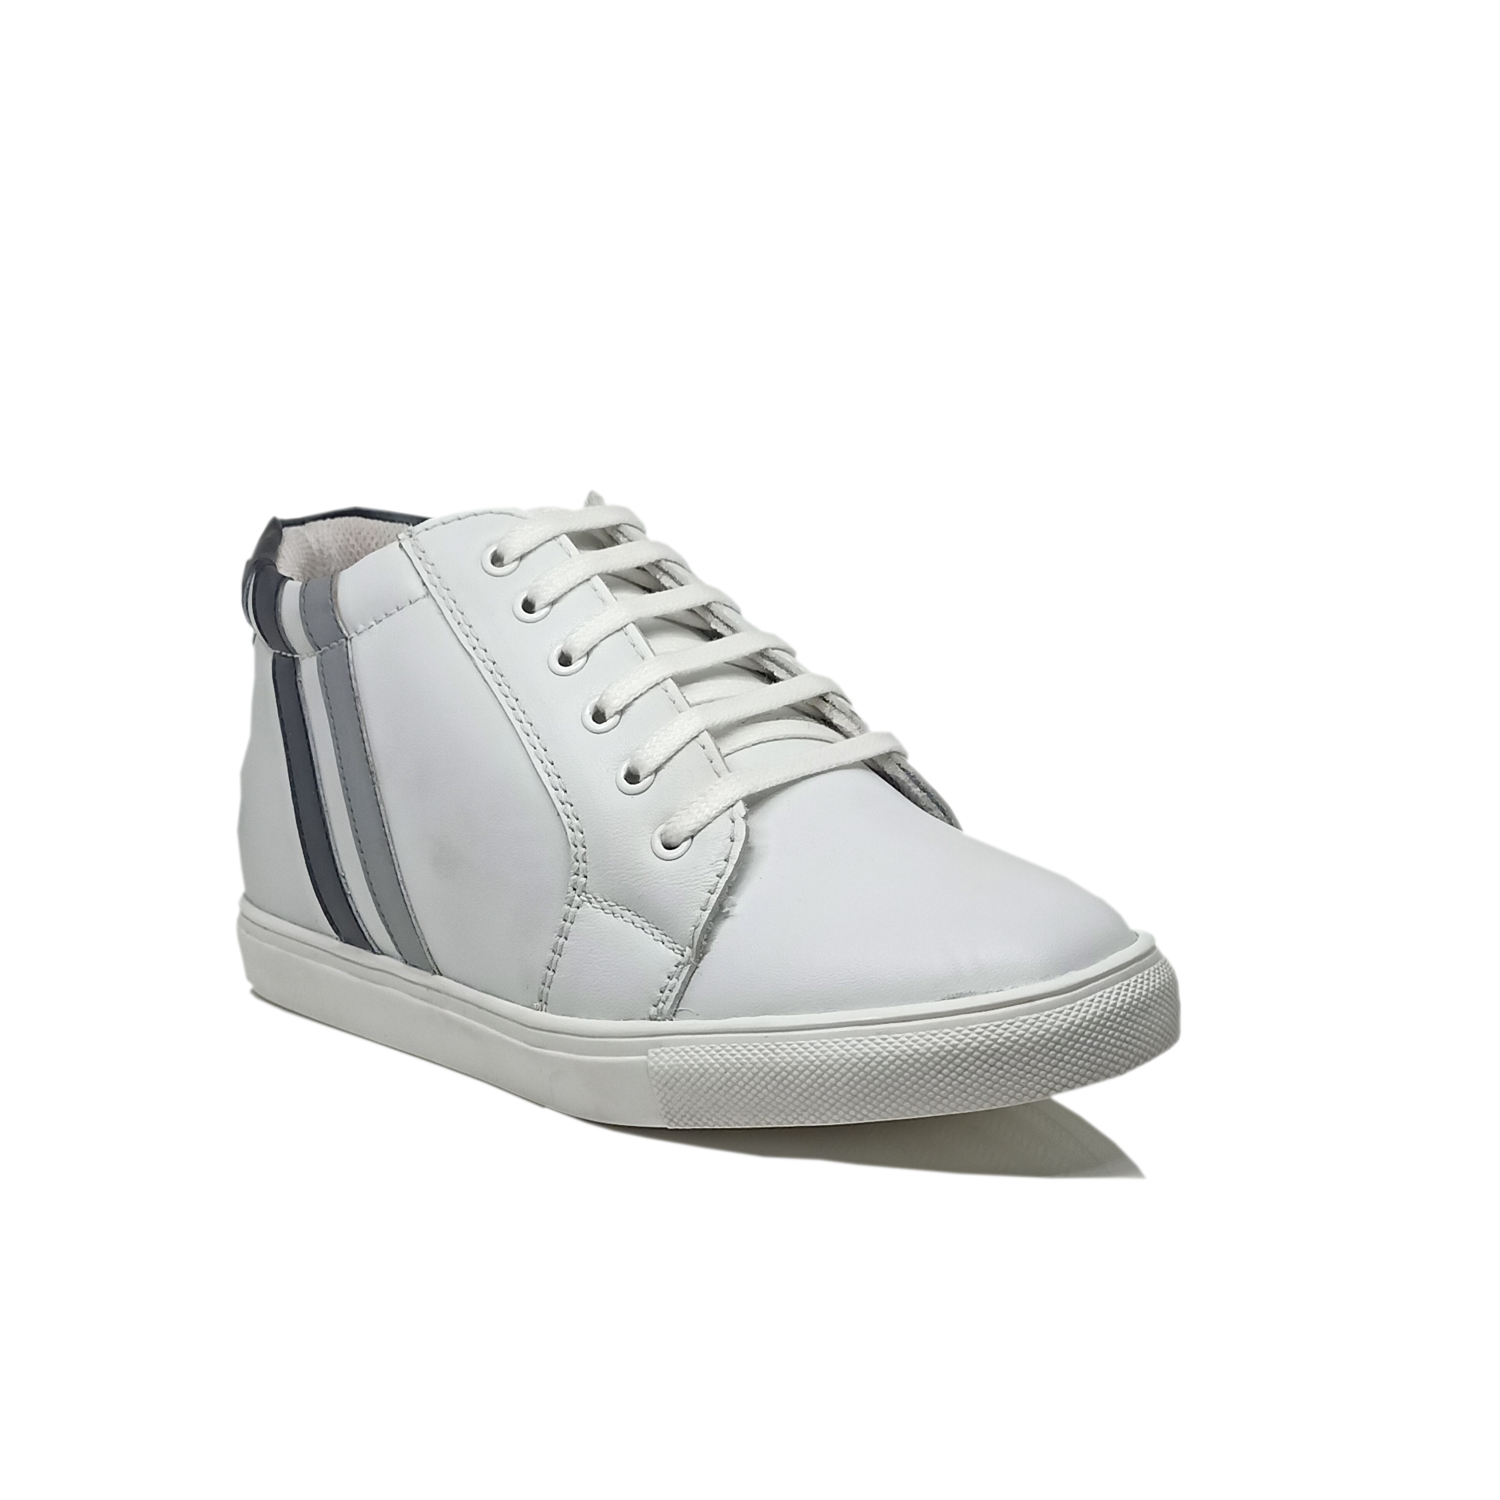 Elevato Height Increasing White Casual Leather Sneaker Shoes for Men – 3 inches